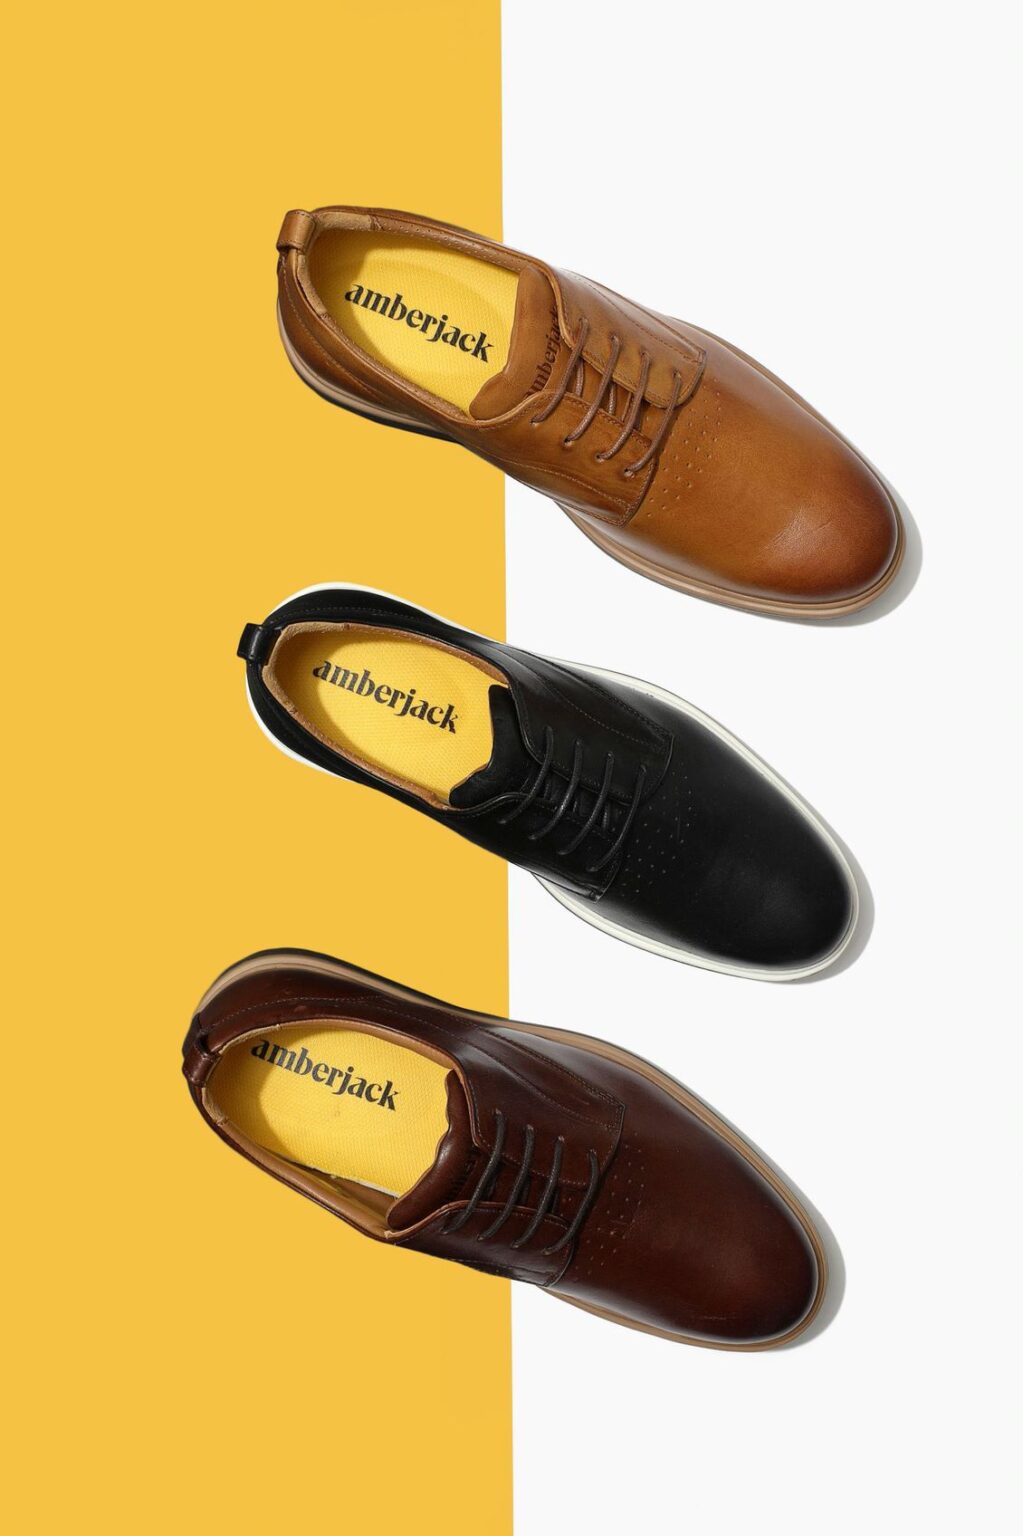 Amberjack Dress Shoes | The Coolector